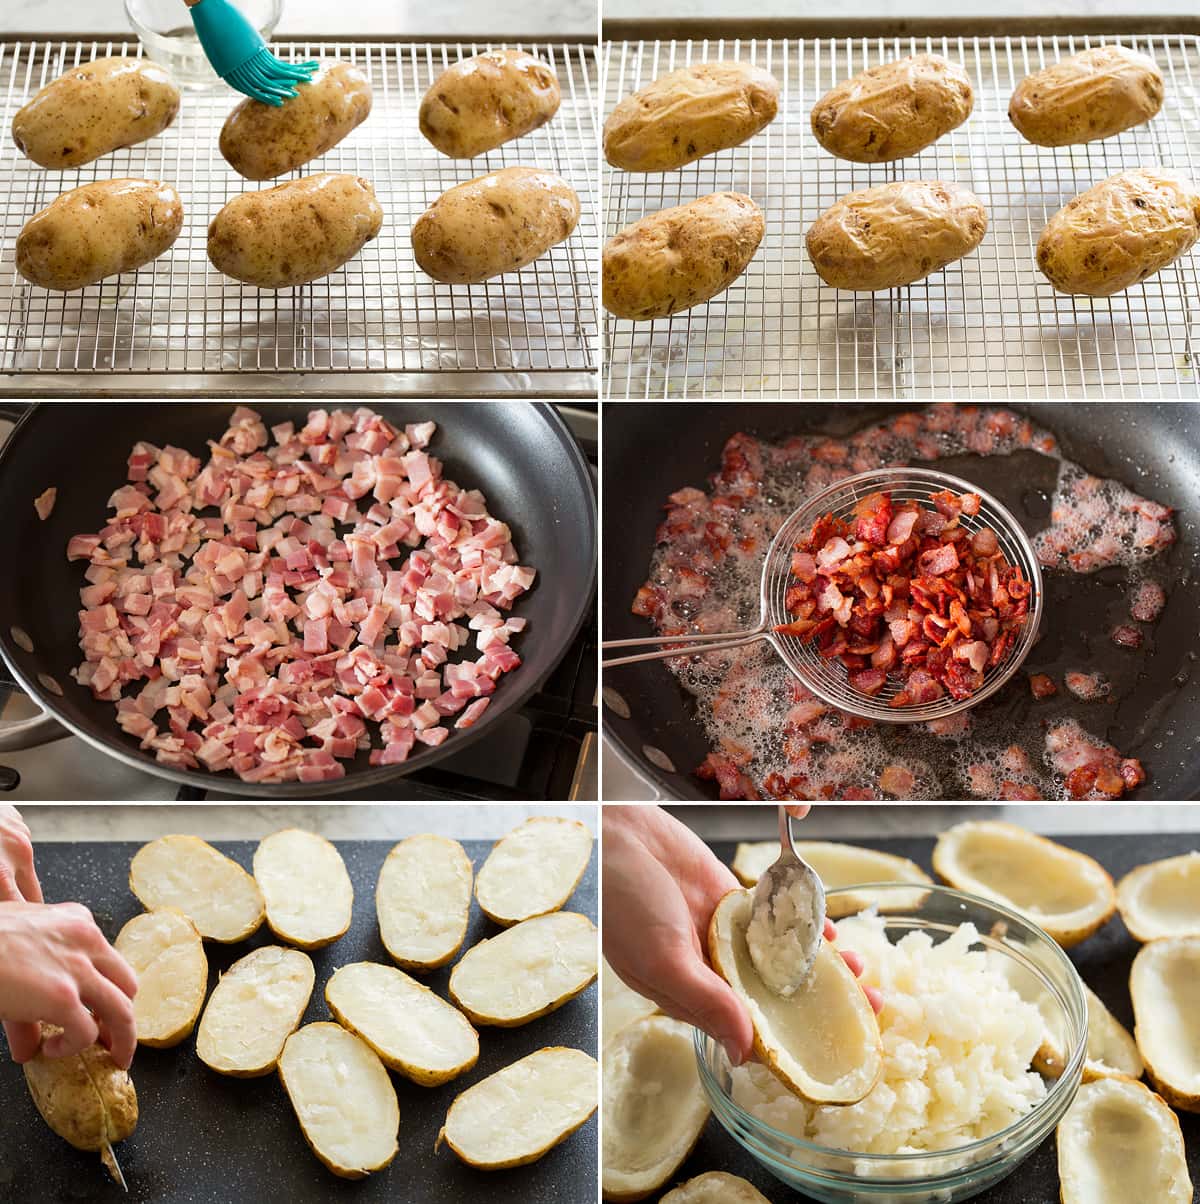 Collage of six images showing first six steps of making potato skins. Includes brushing potatoes with oil, shows after baking. Then diced bacon shown before and after cooking in skillet. Last photos show halving baked potatoes and scooping out flesh. 